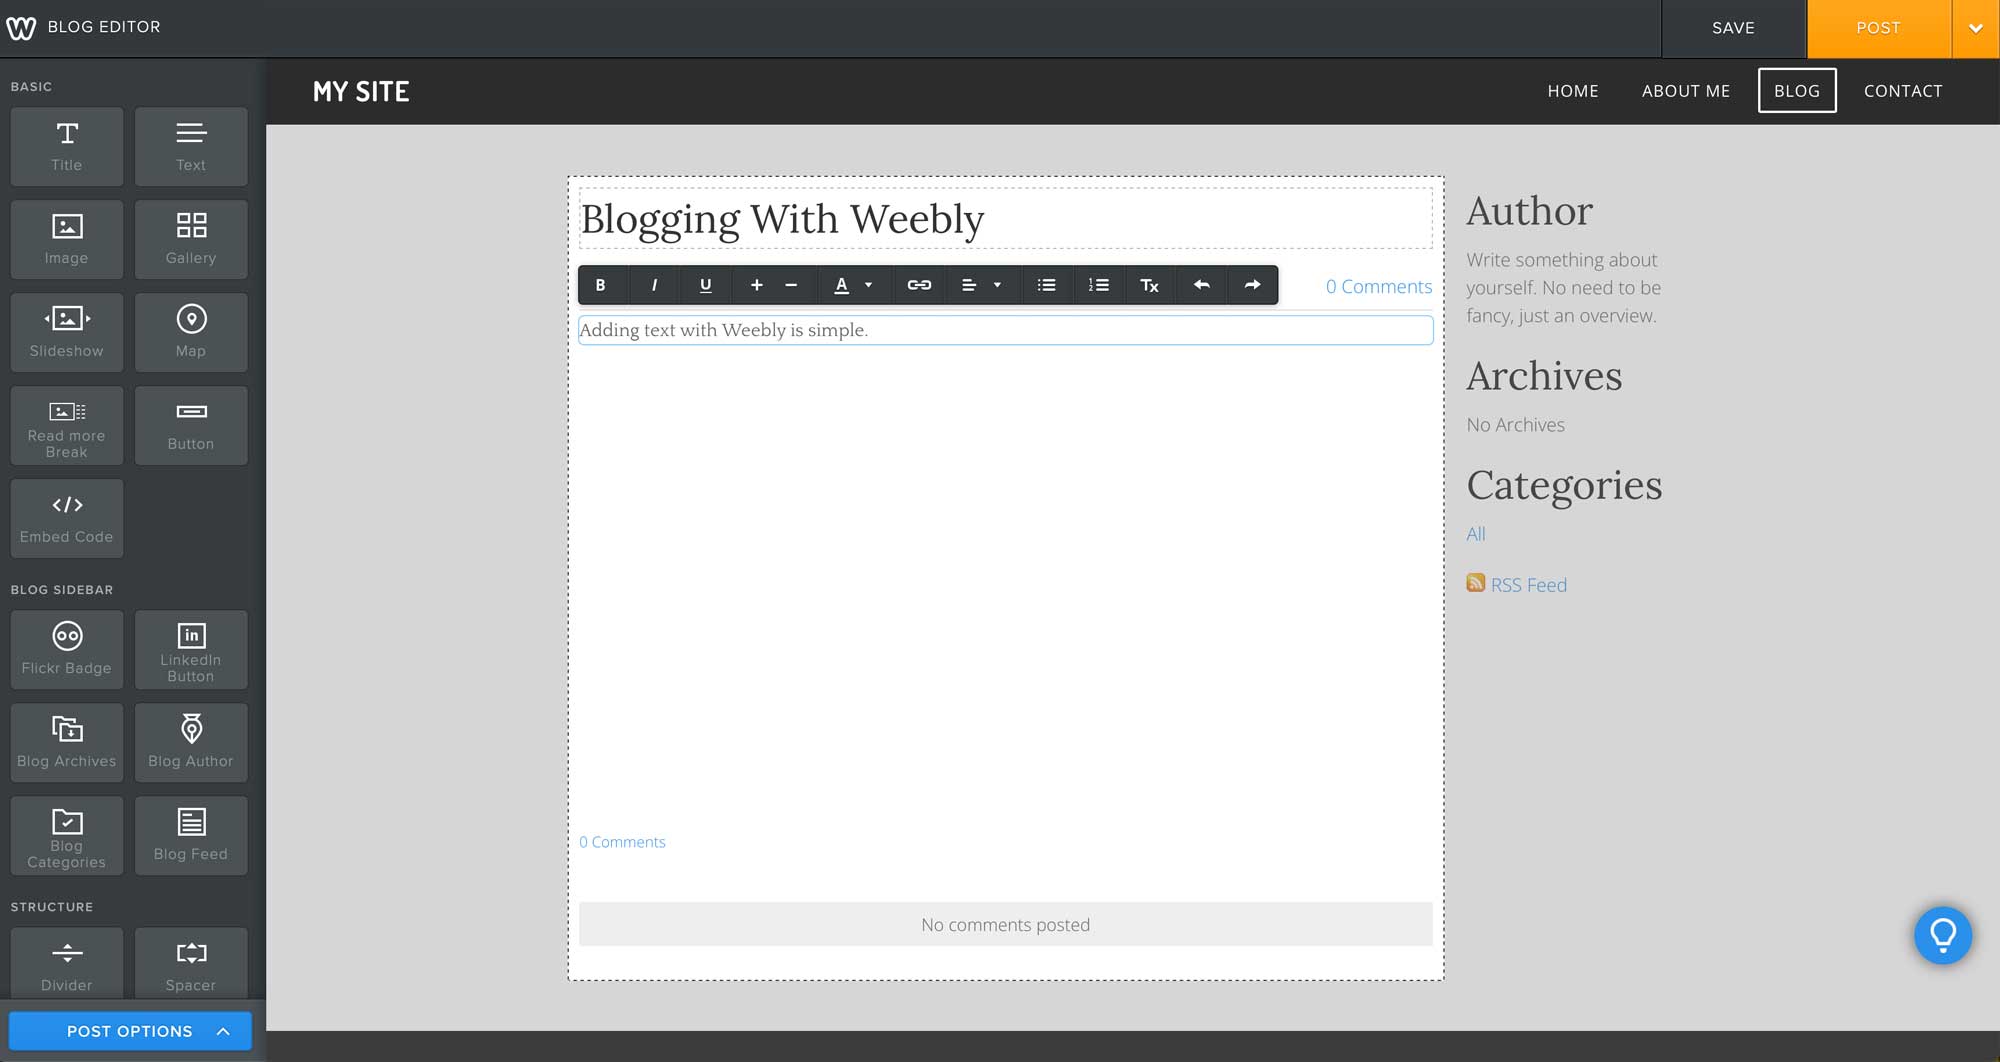 Publishing with Weebly